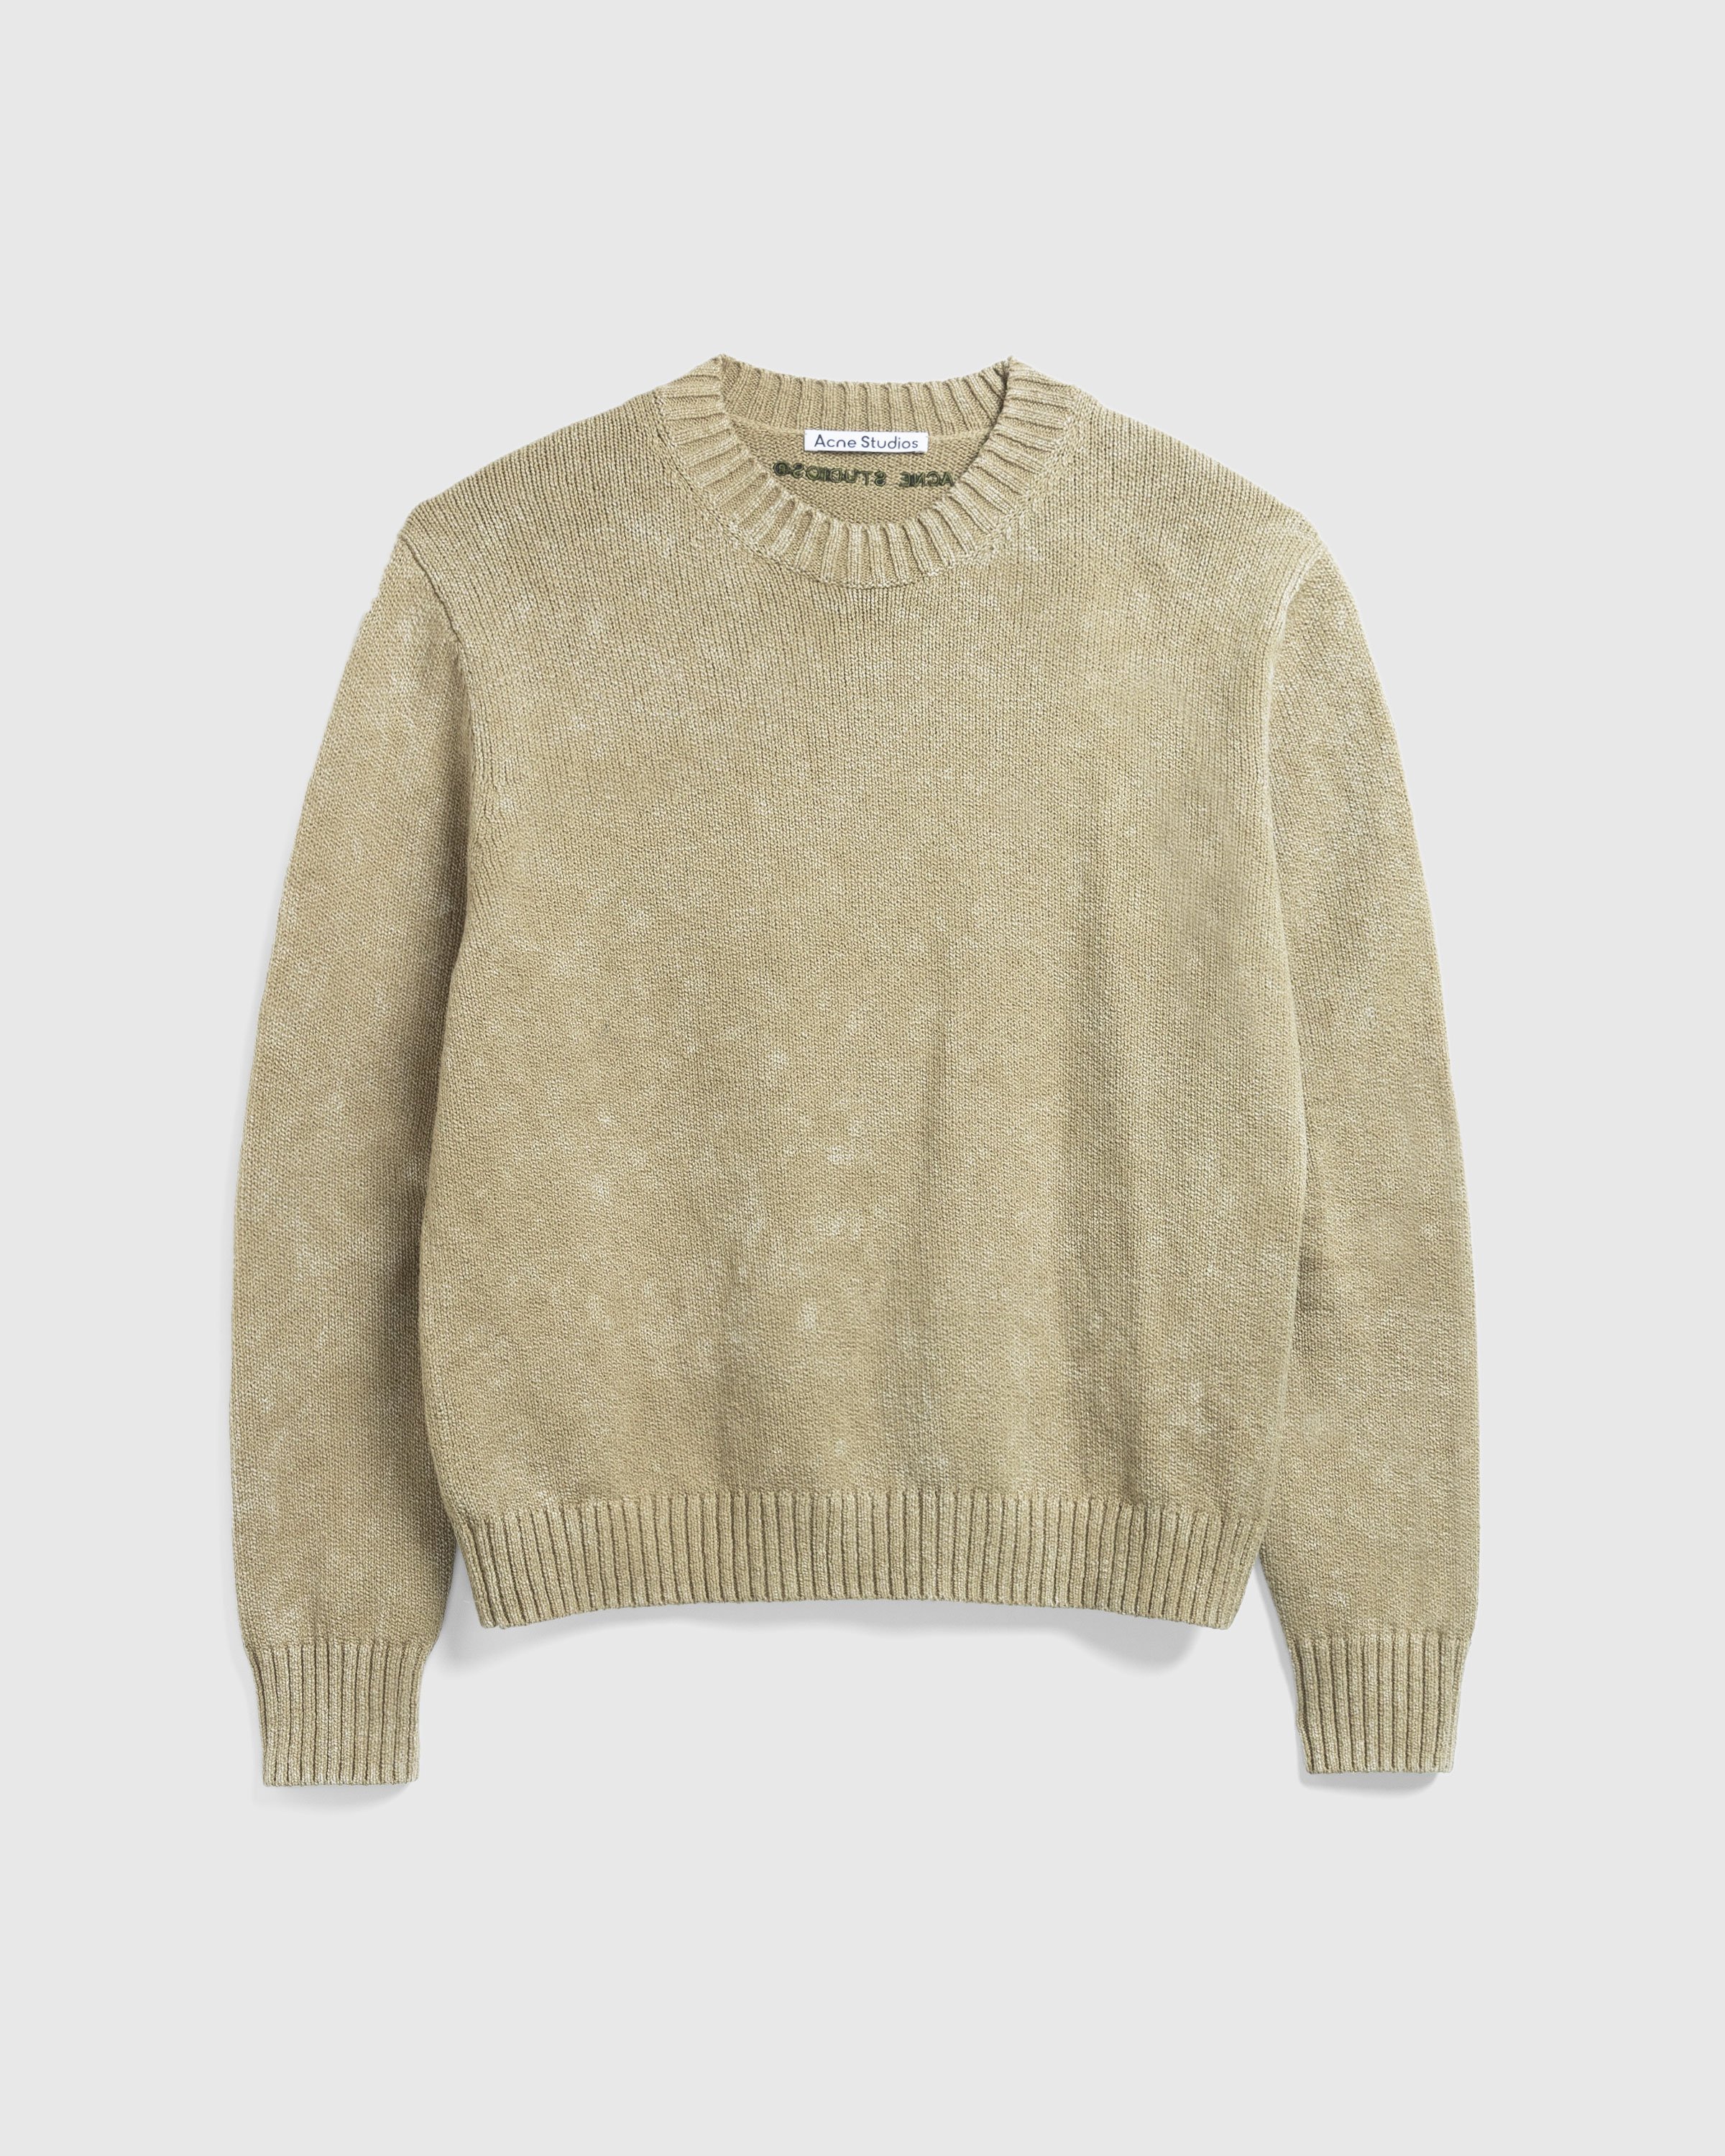 Acne Studios - FN-MN-KNIT000443 Olive Green - Clothing - Green - Image 1